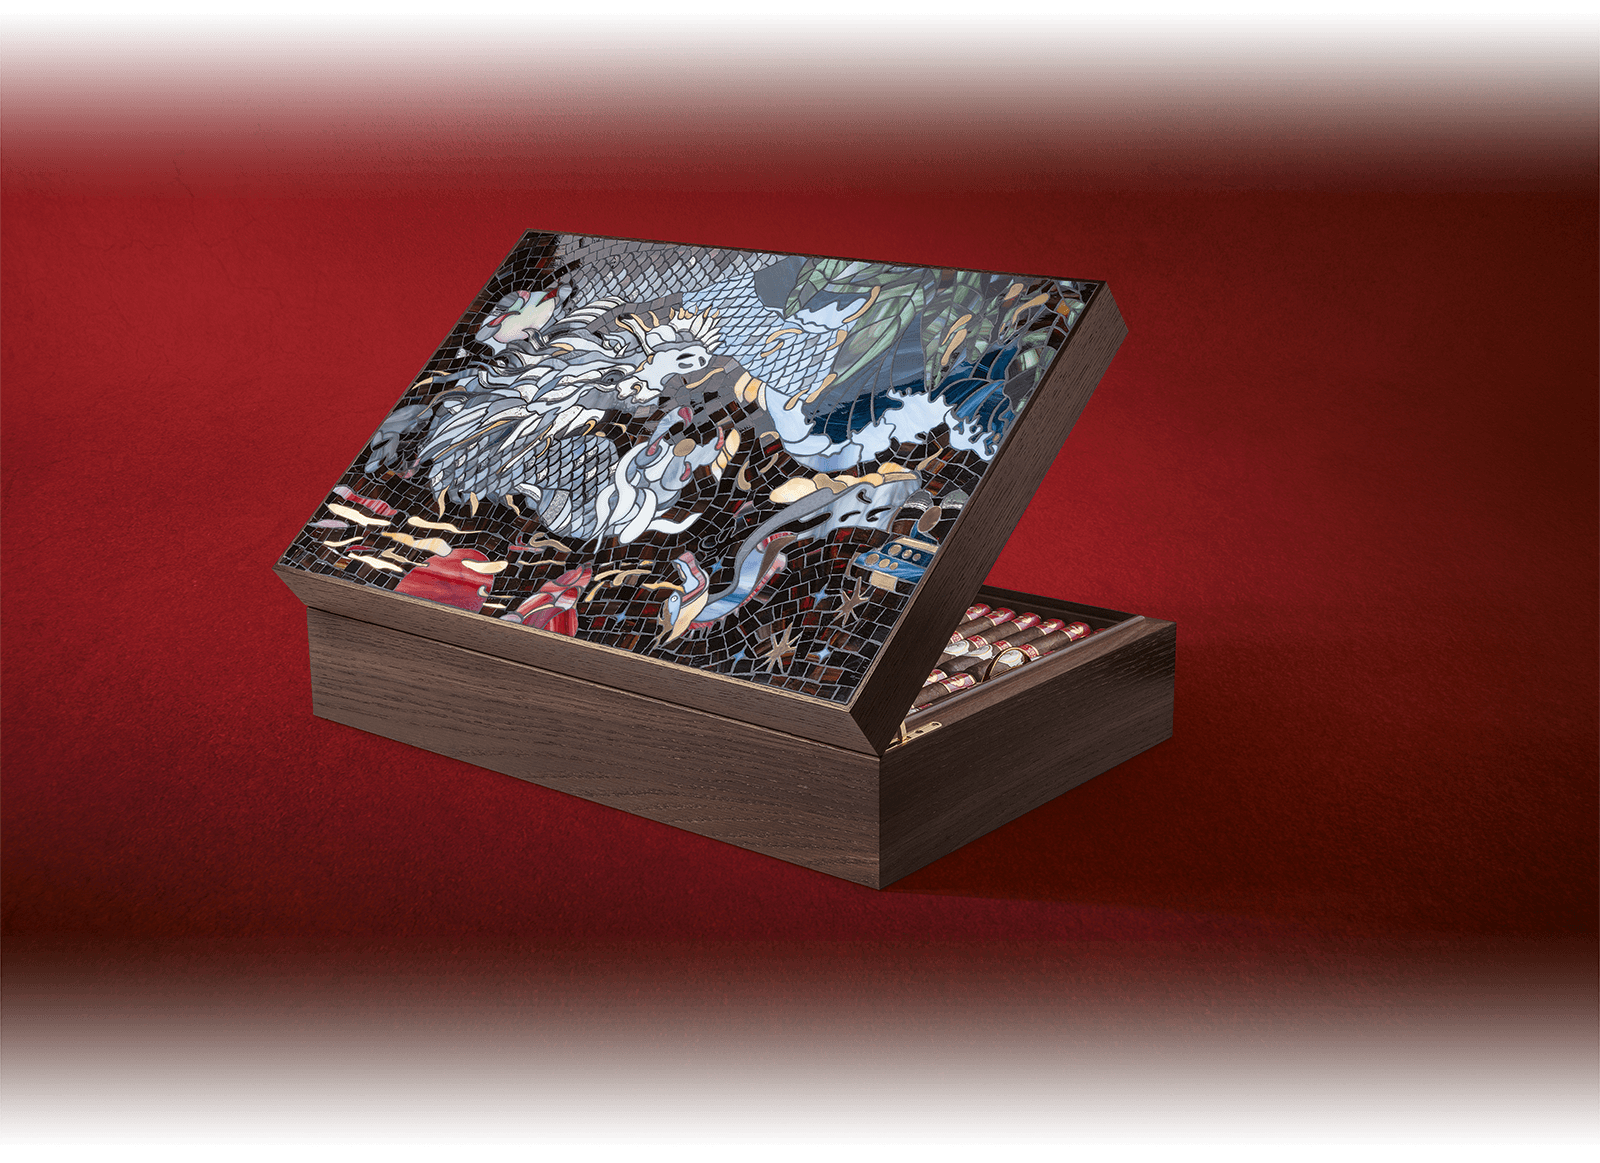 Davidoff Year of the Dragon Masterpiece Humidor with the dragon mosaic after the oil painting by Zhang Zhaoying.